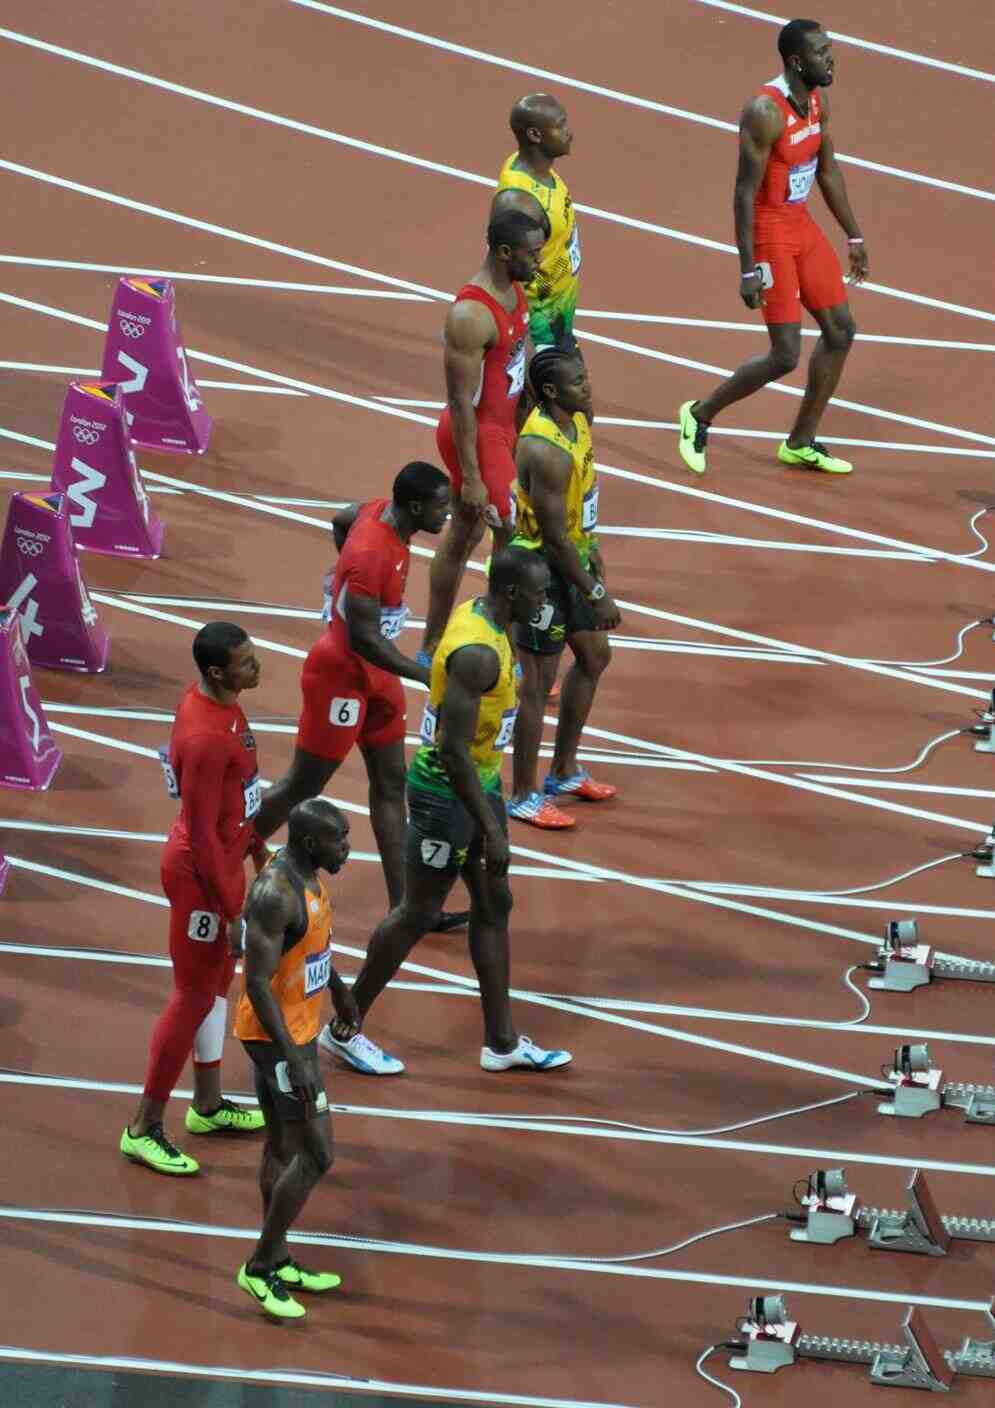 Who is in 100m final?